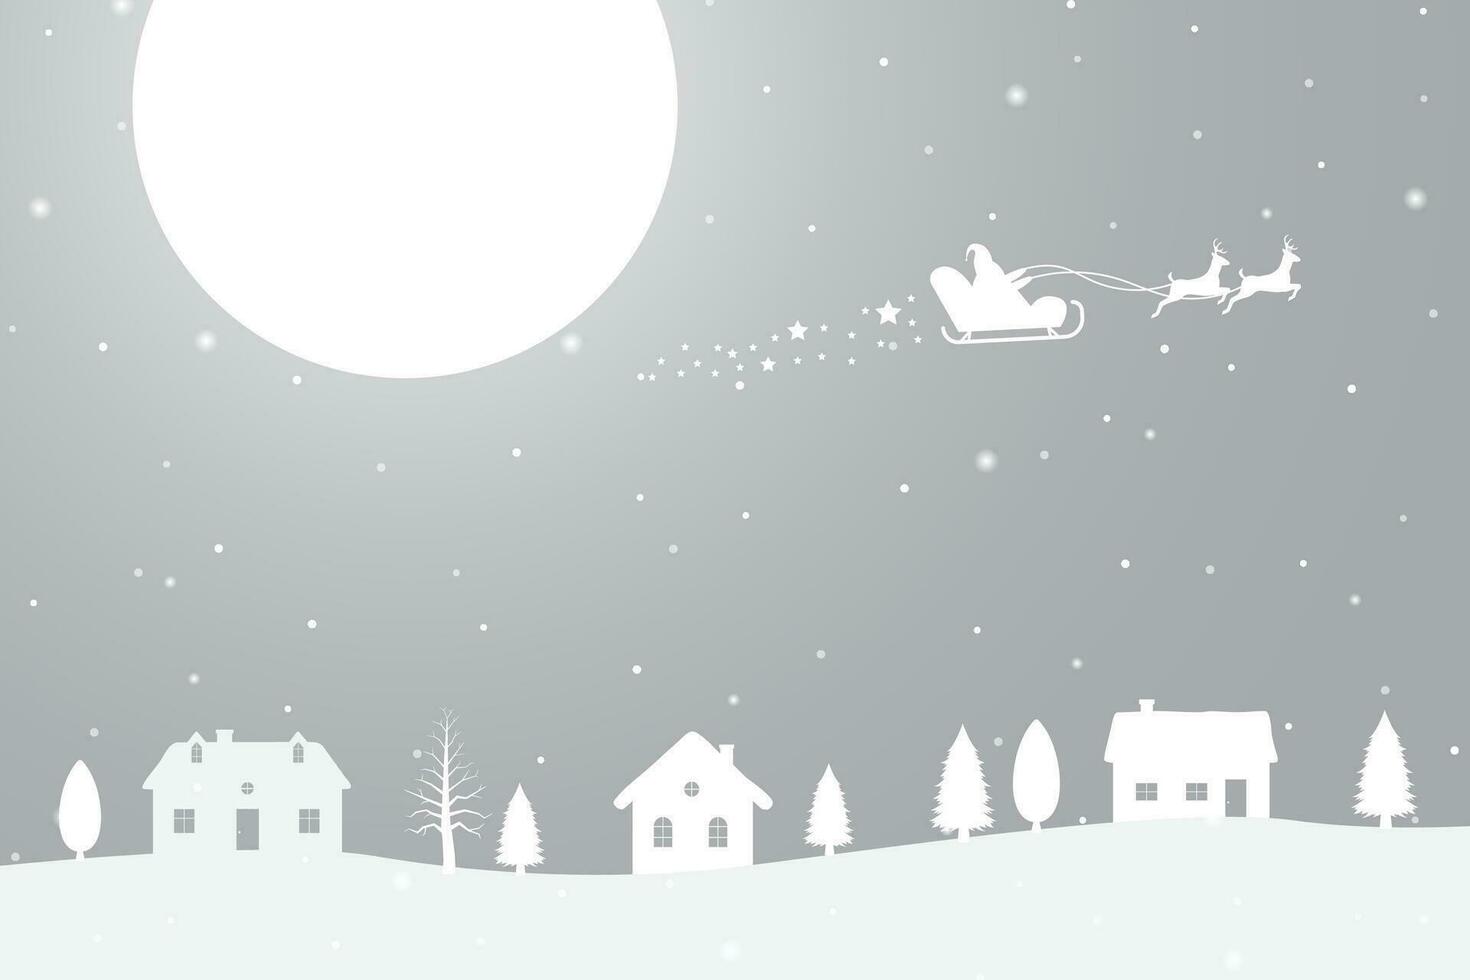 Merry Christmas and Happy New Years in background with reindeer and Santa Claus flying above at night vector